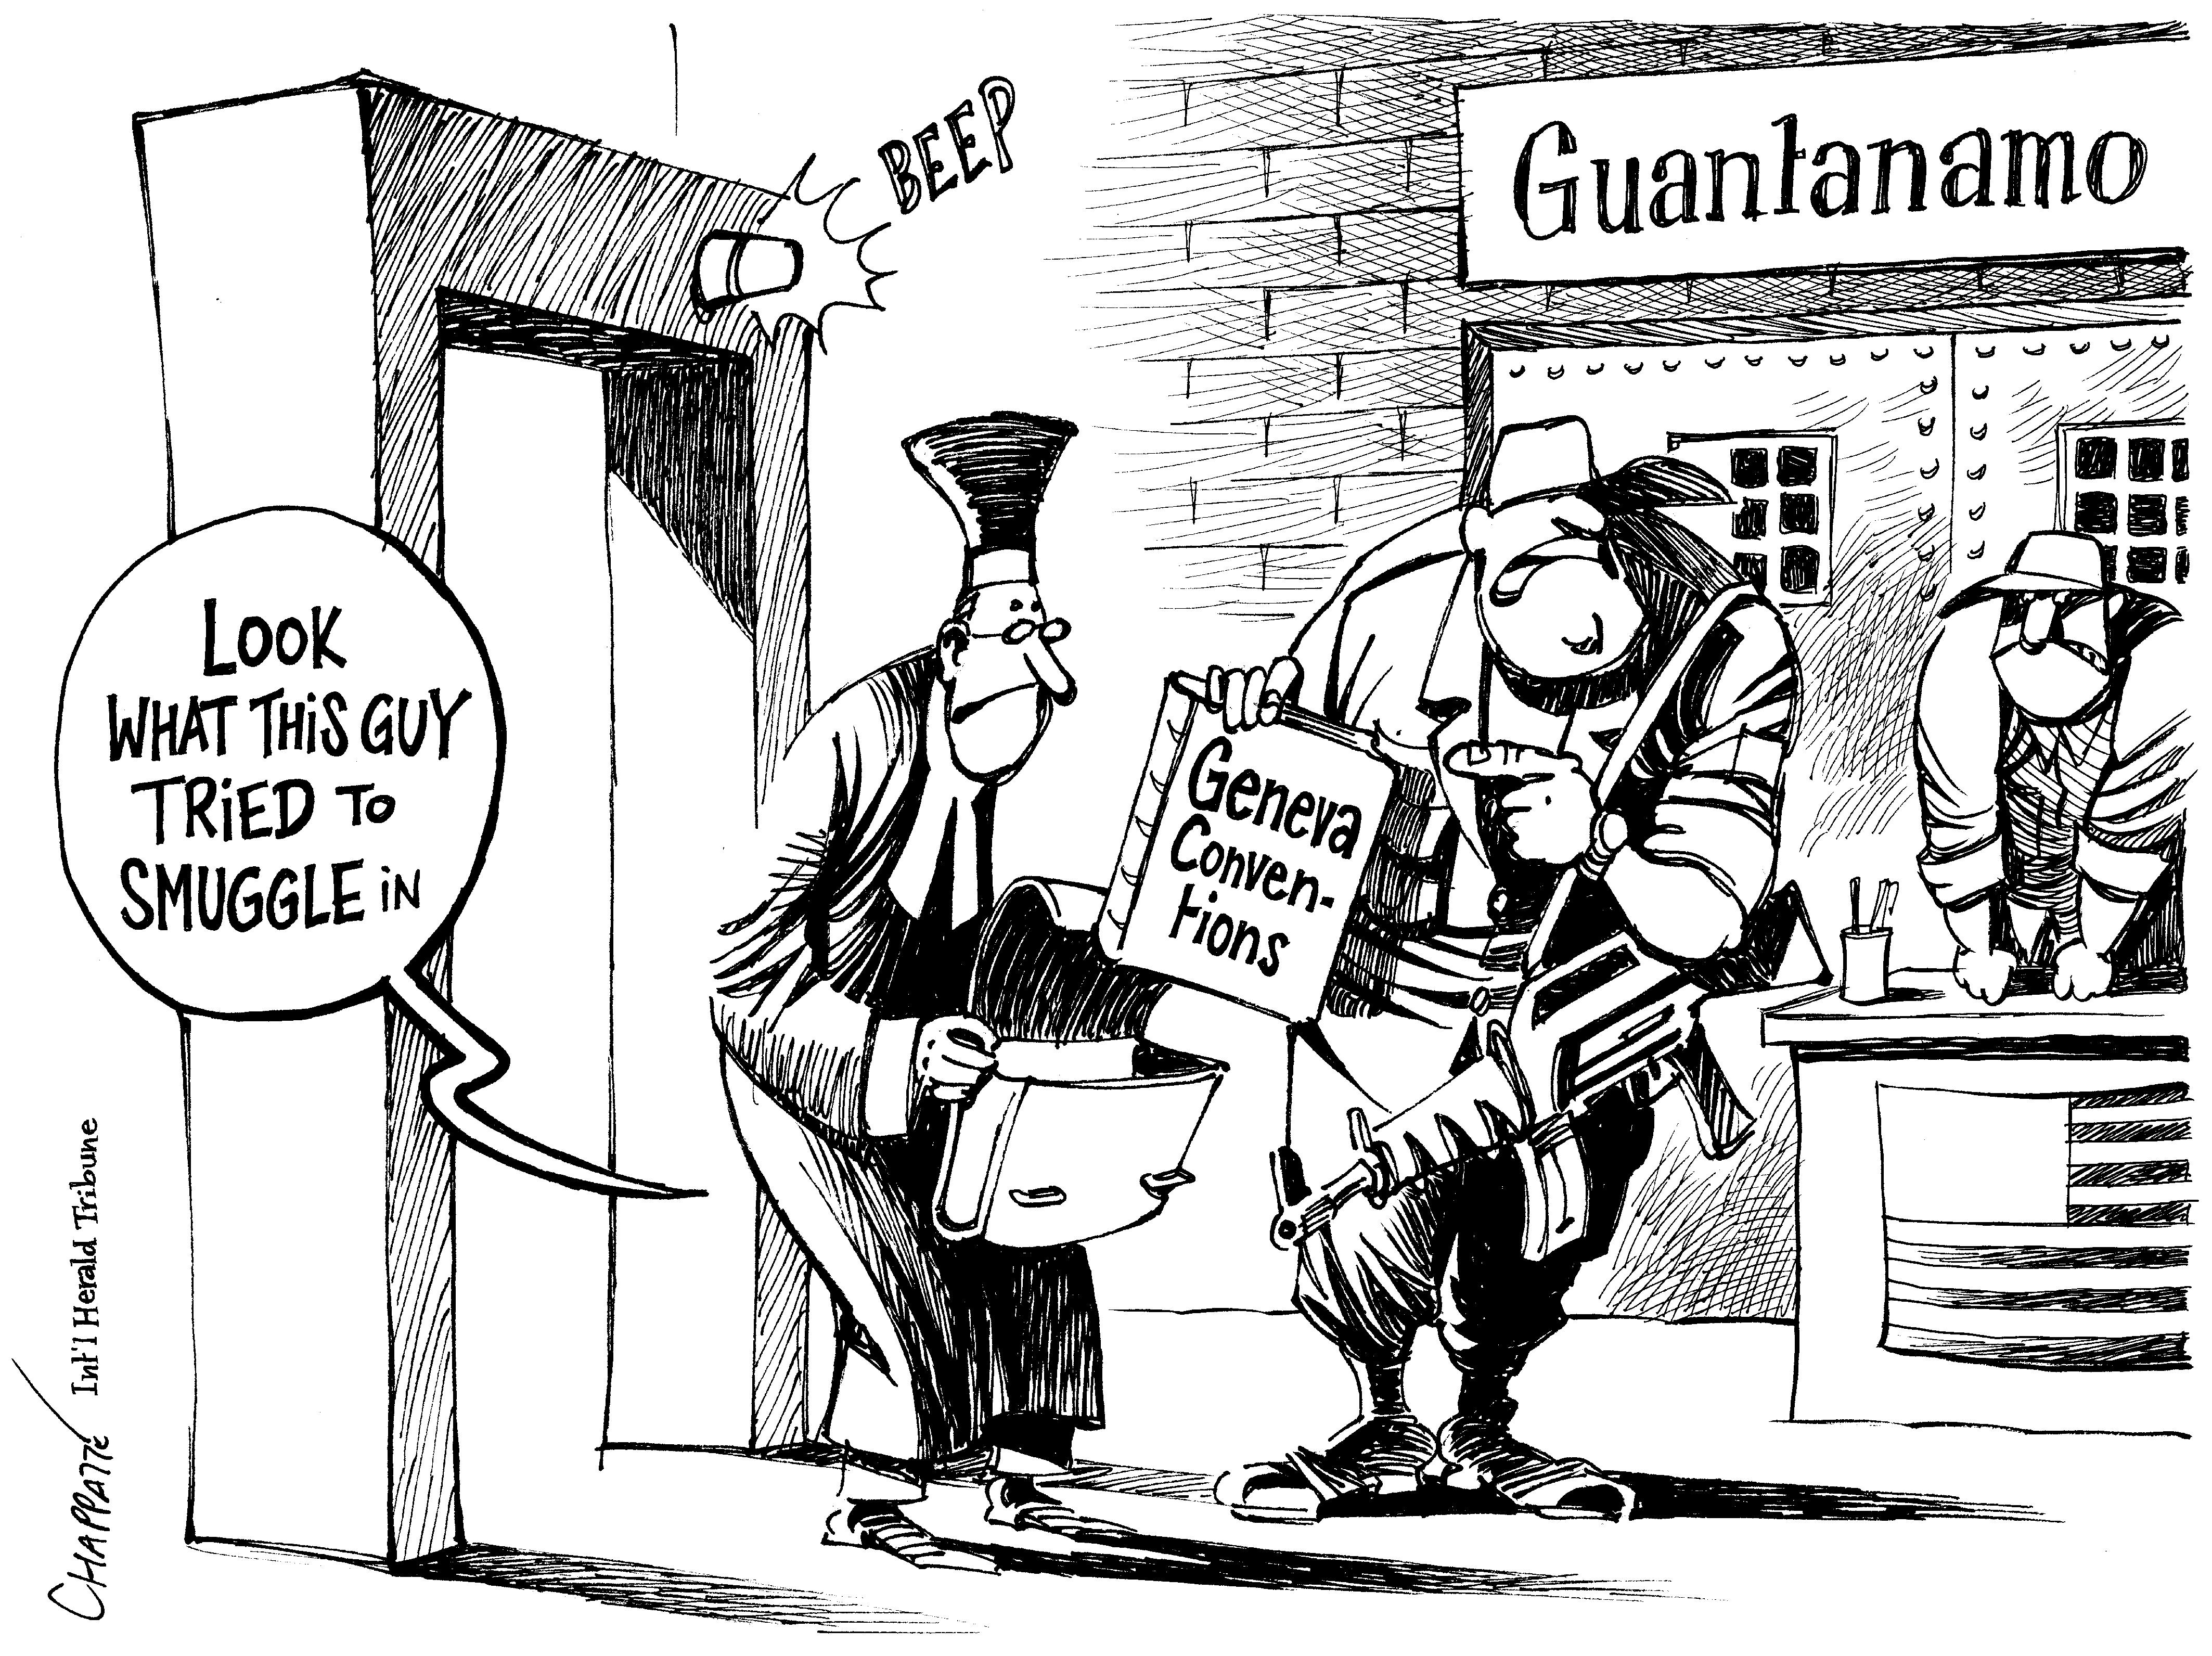 Rights of Guantanamo detainees